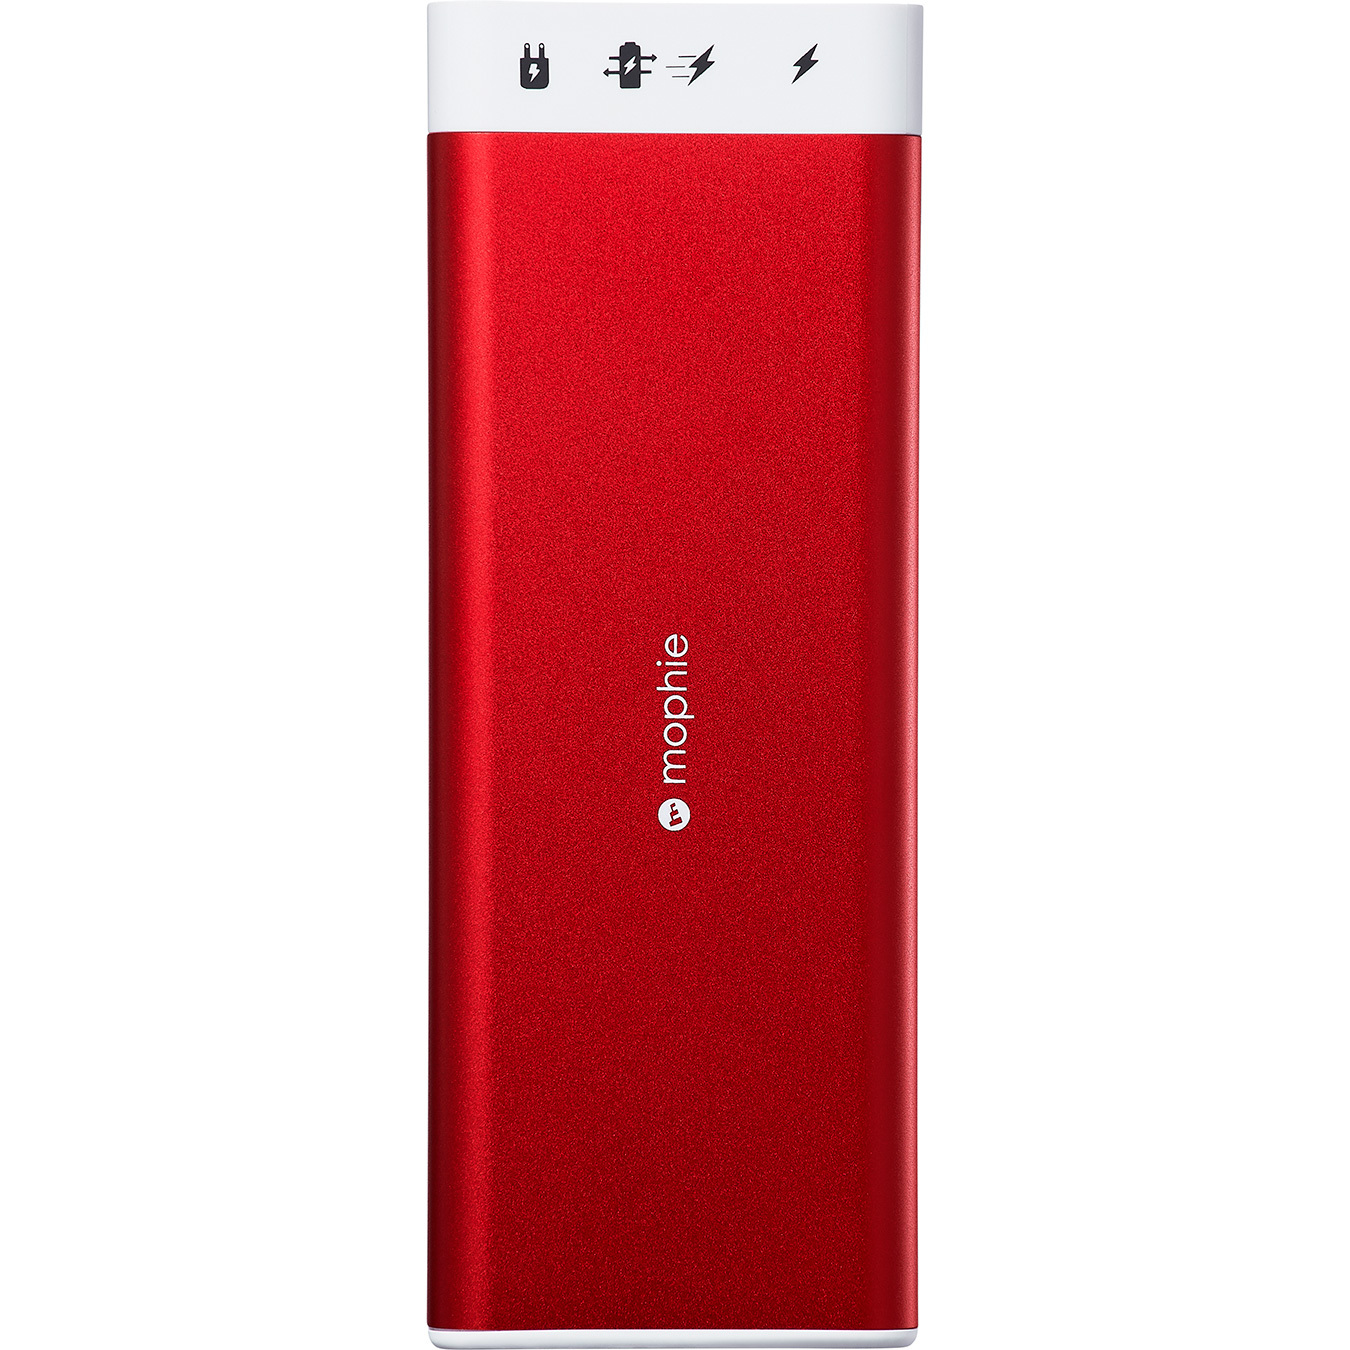 Supreme mophie encore 20k Charger - FW17 - US